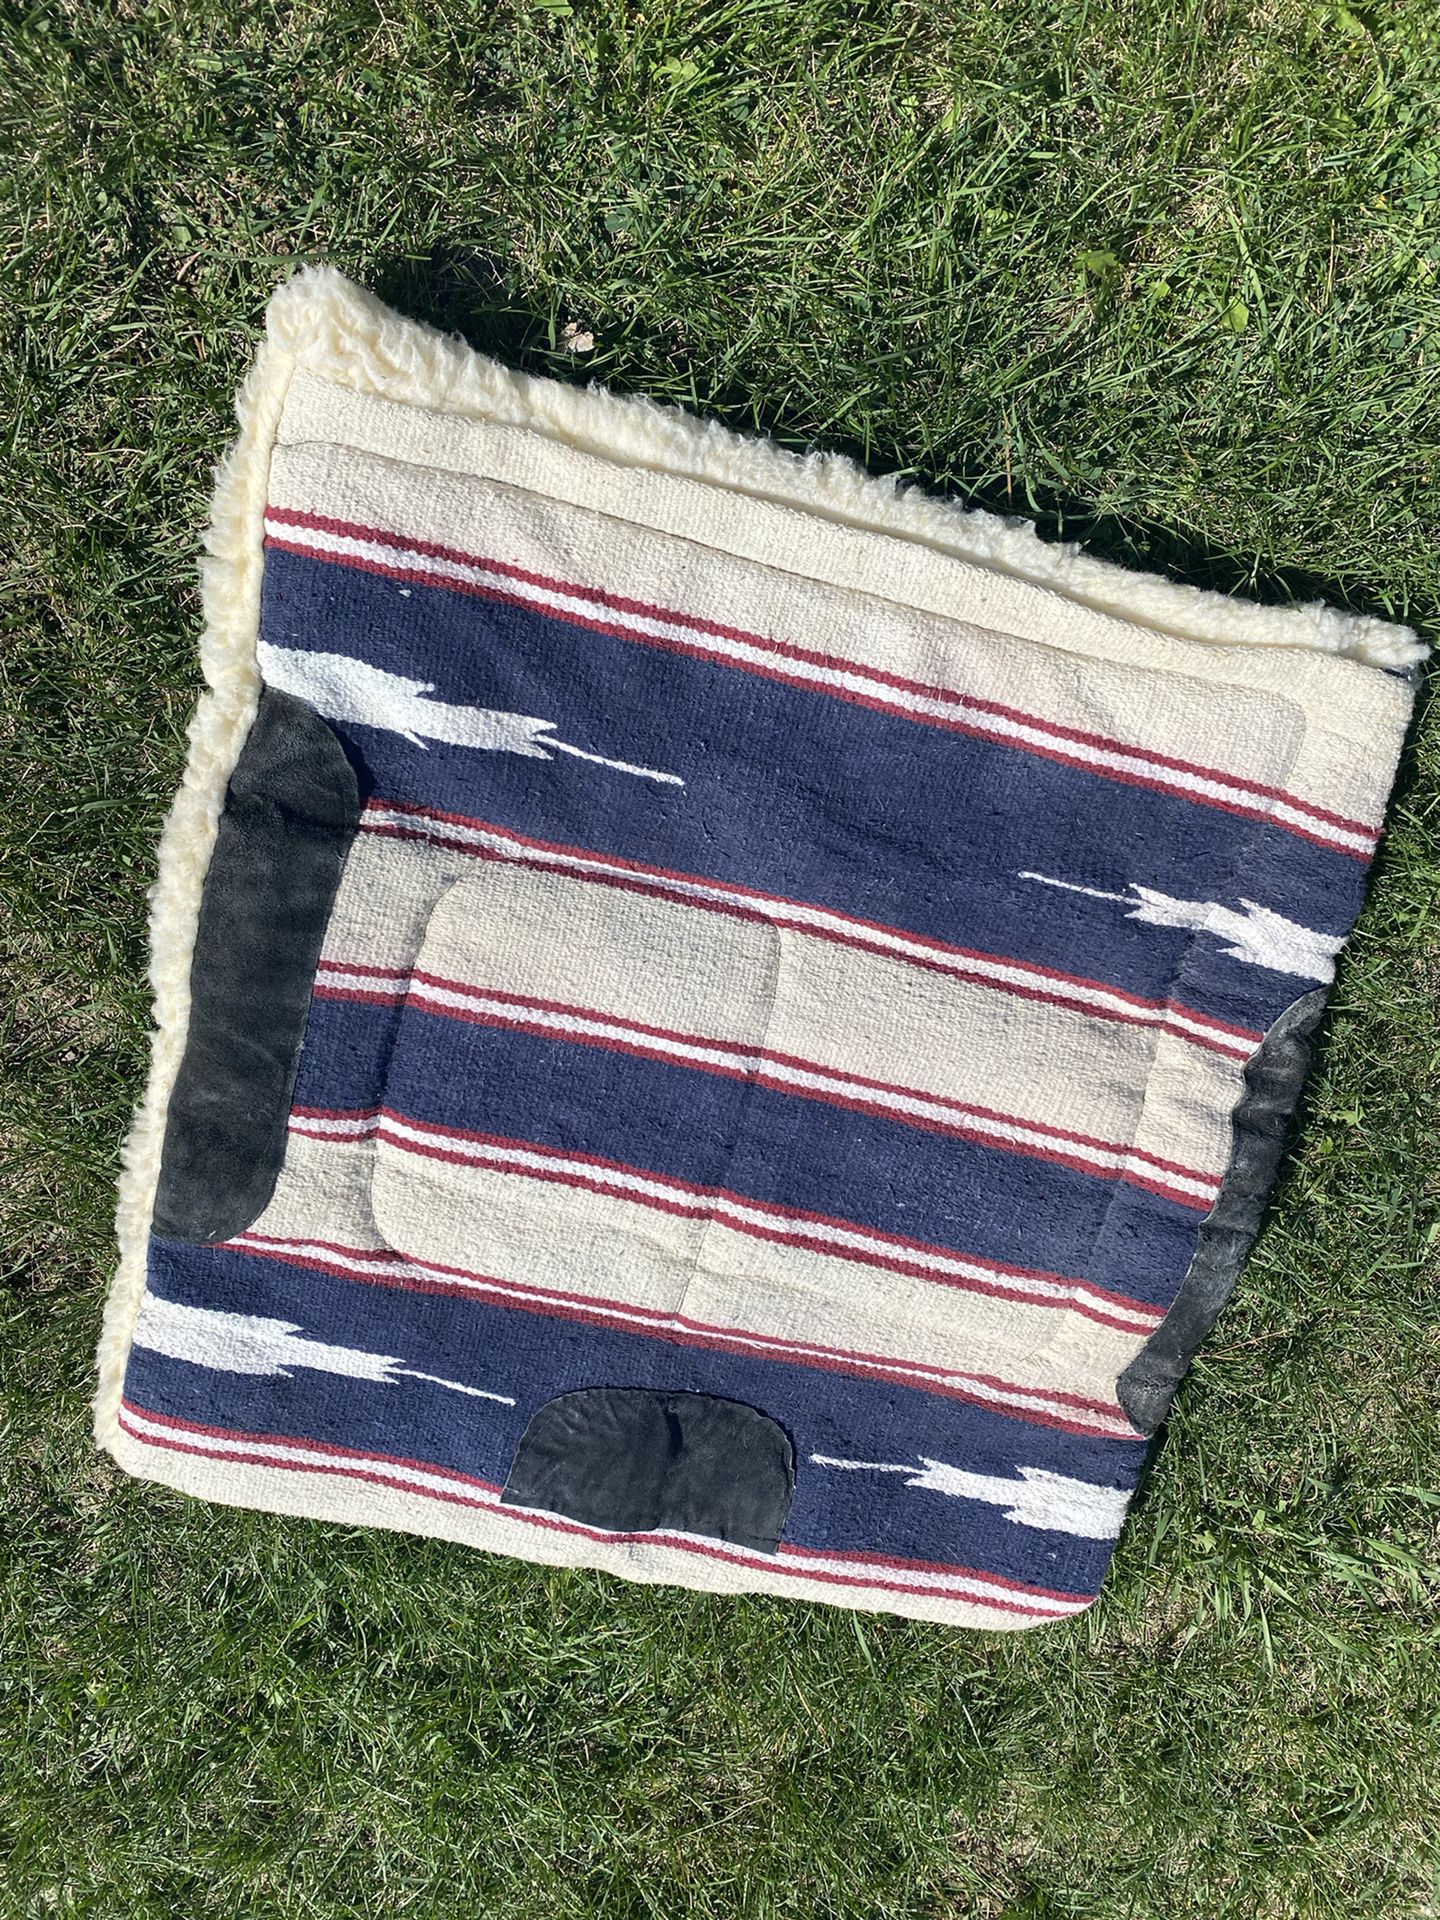 Saddle pad.  Used couple of times 28x30. No problem with it